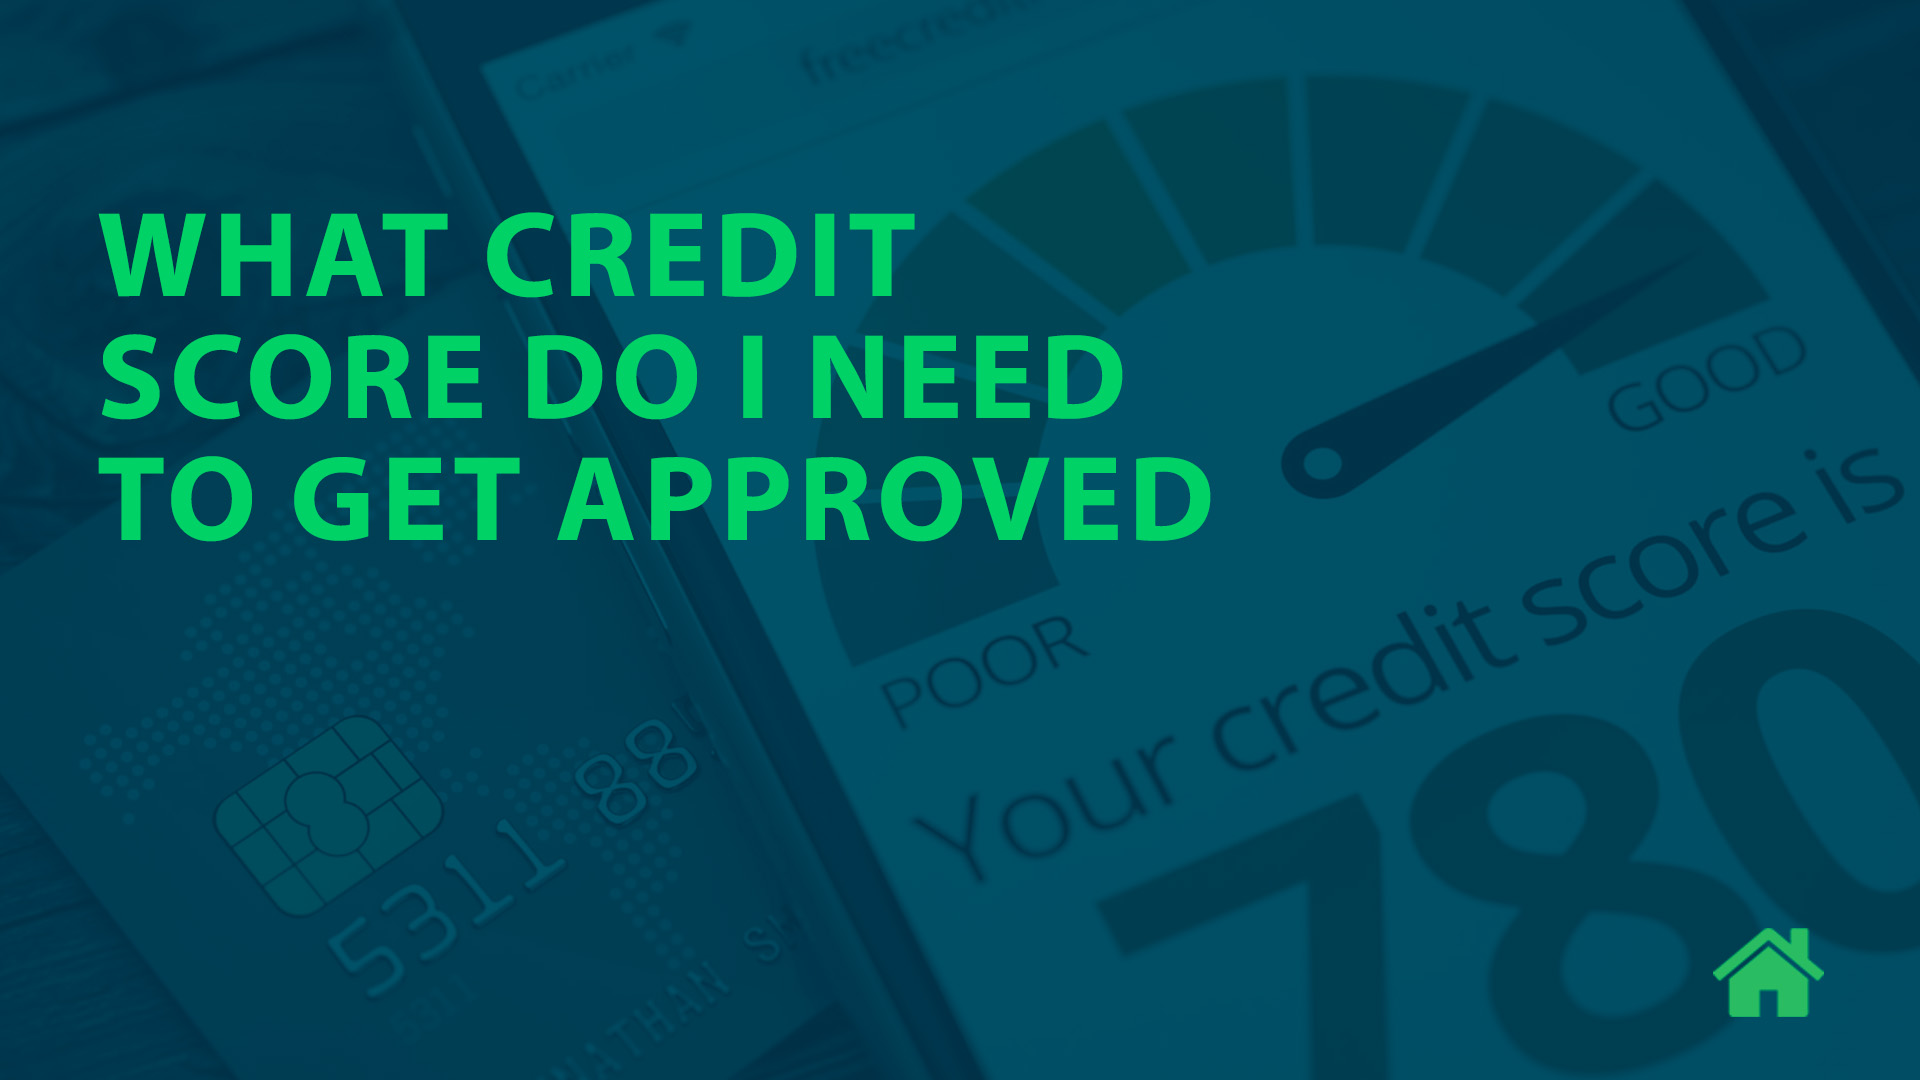 What credit score do I need to get approved?